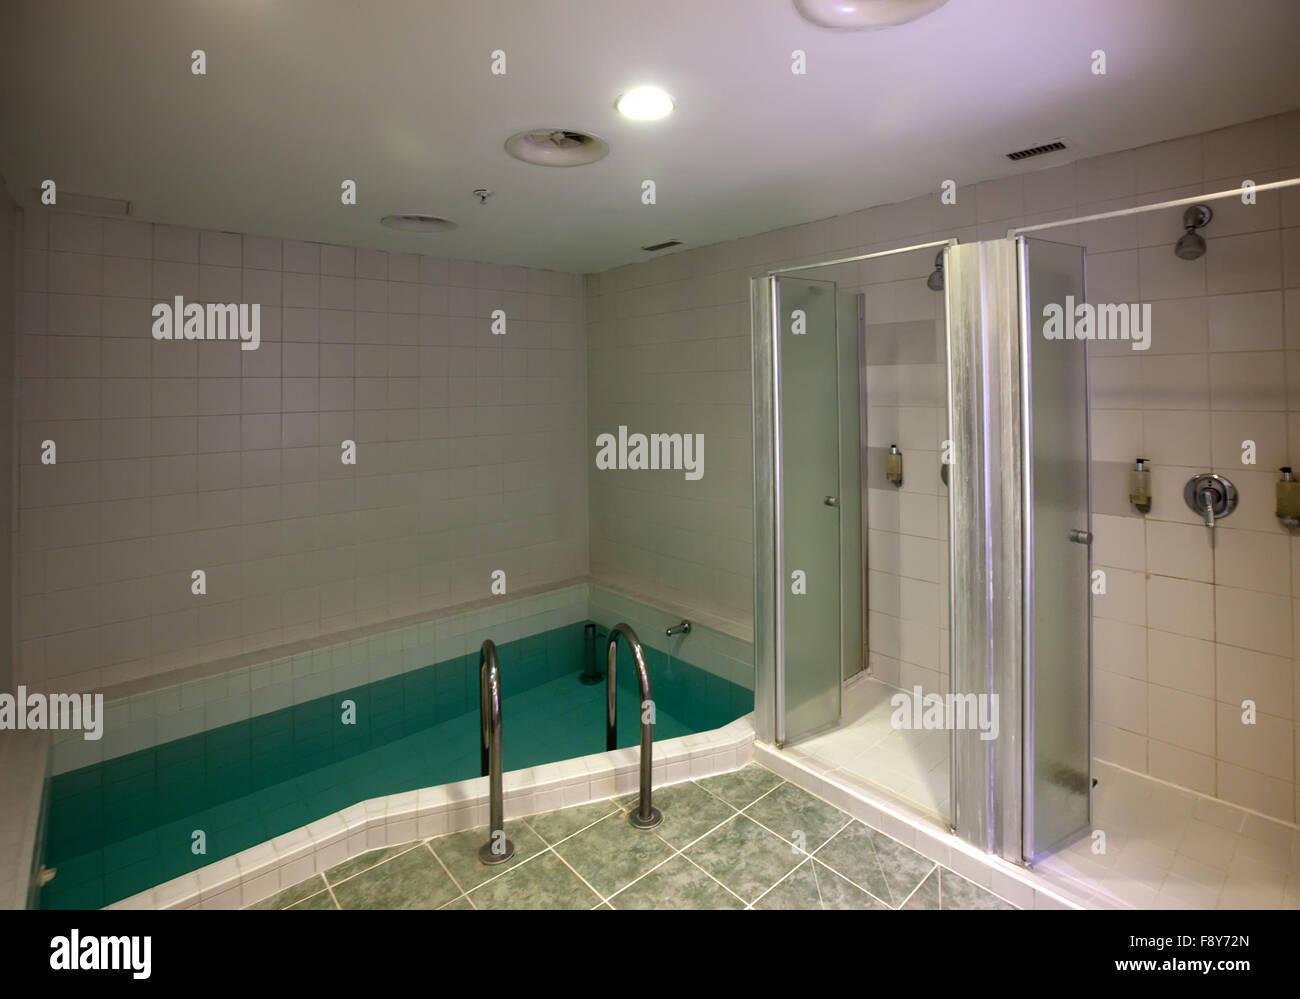 Interior of swimming pool with shower Stock Photo - Alamy